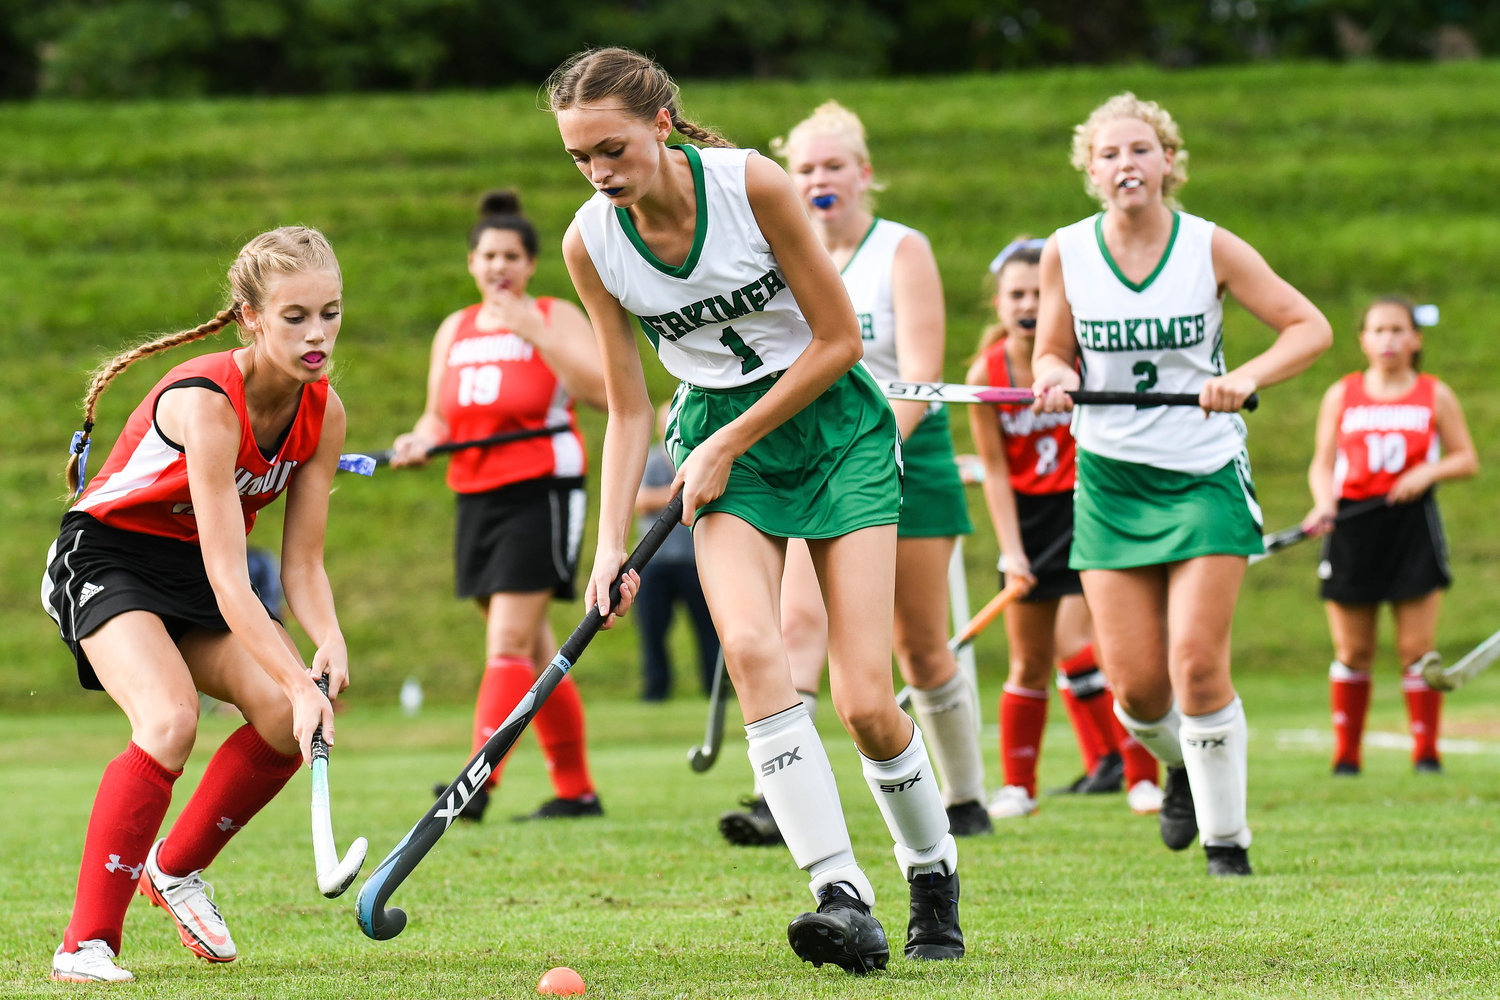 Herkimer player Sydney Bell (1) moves the ball against Sauquoit Valley defender Emilie Fancett during the Center State Conference field hockey game on Monday in Herkimer. The two teams played to a scoreless tie.